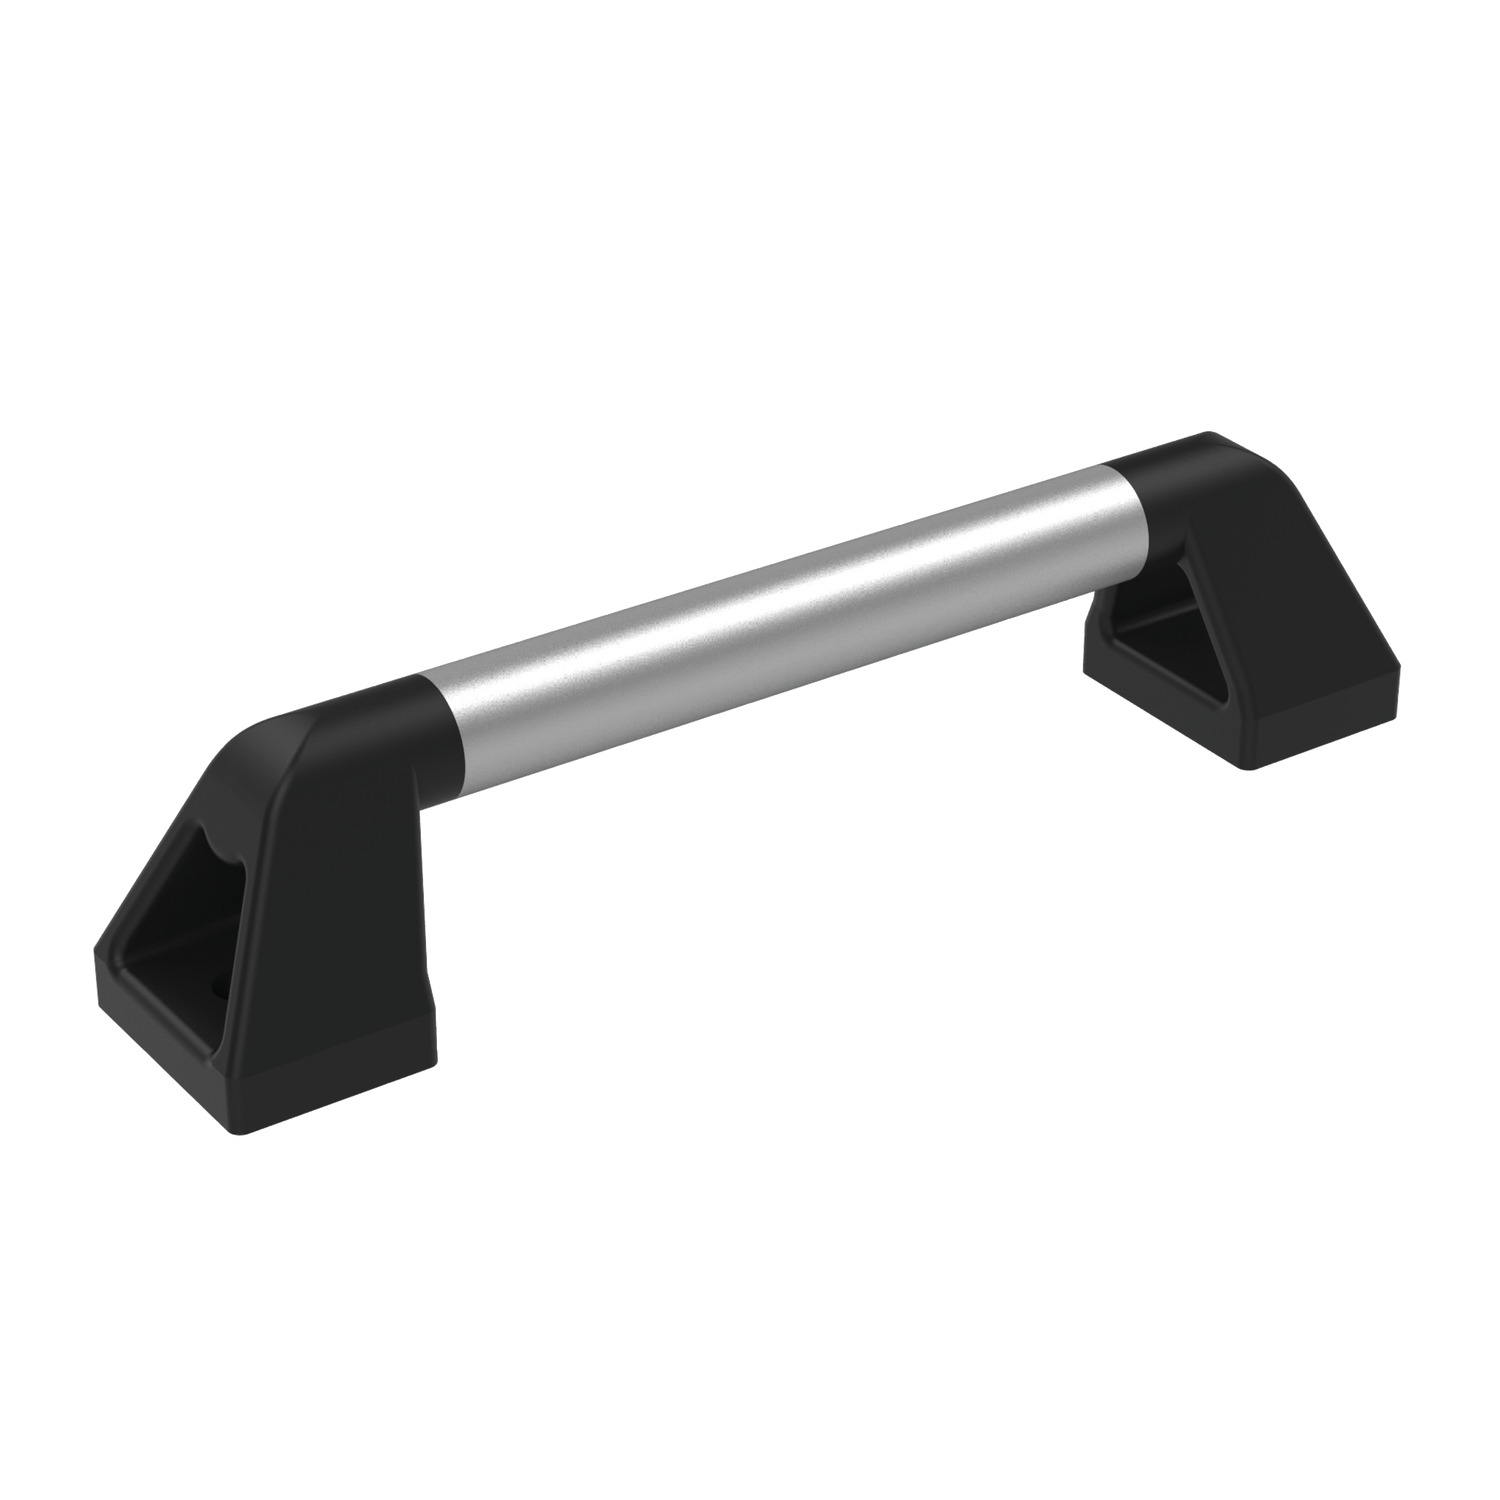 Product 79420, Pull Handles - Heavy Duty stainless steel and plastic / 